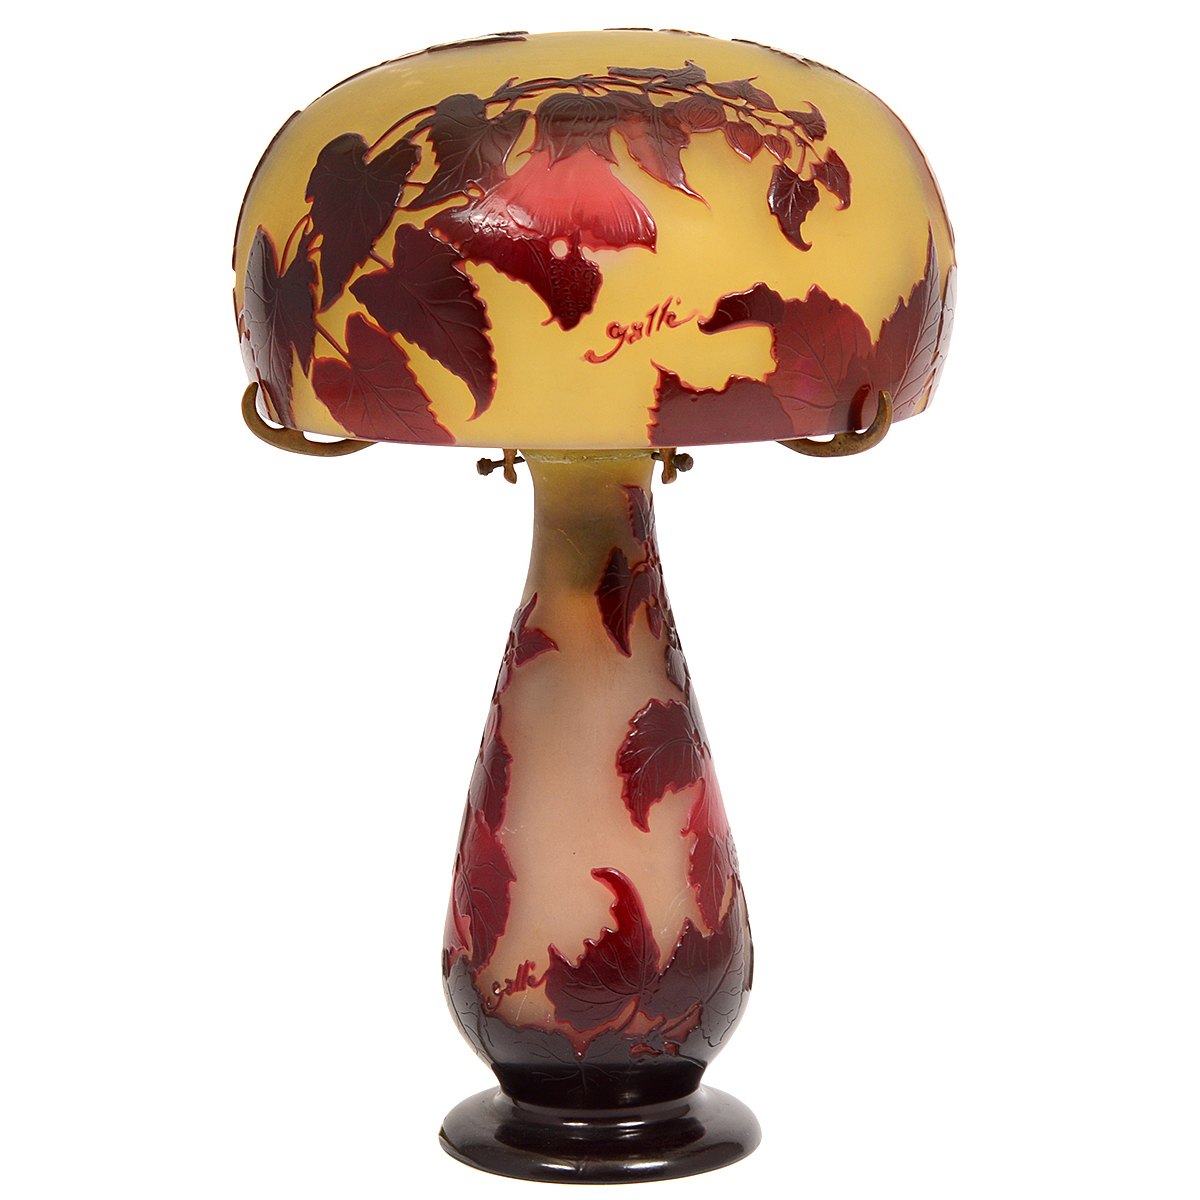 Circa-1910 Galle cameo glass lamp and shade. Auction Gallery of the Palm Beaches image